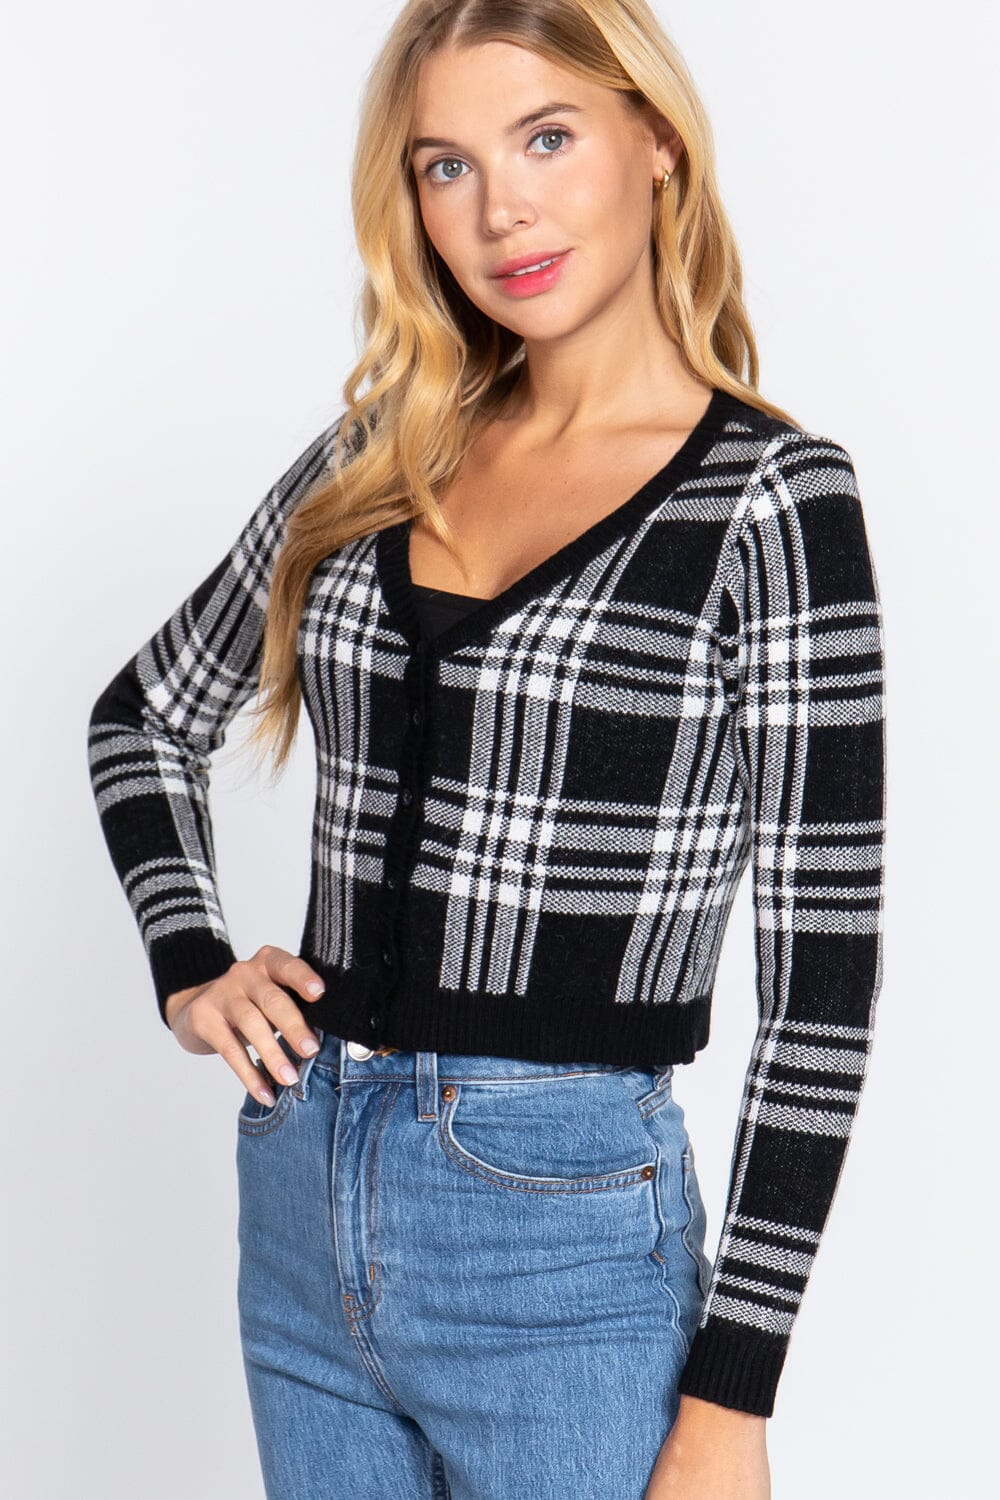 Black Long Sleeve V neck Fitted Button Down Plaid Sweater Cardigan_ jehouze 